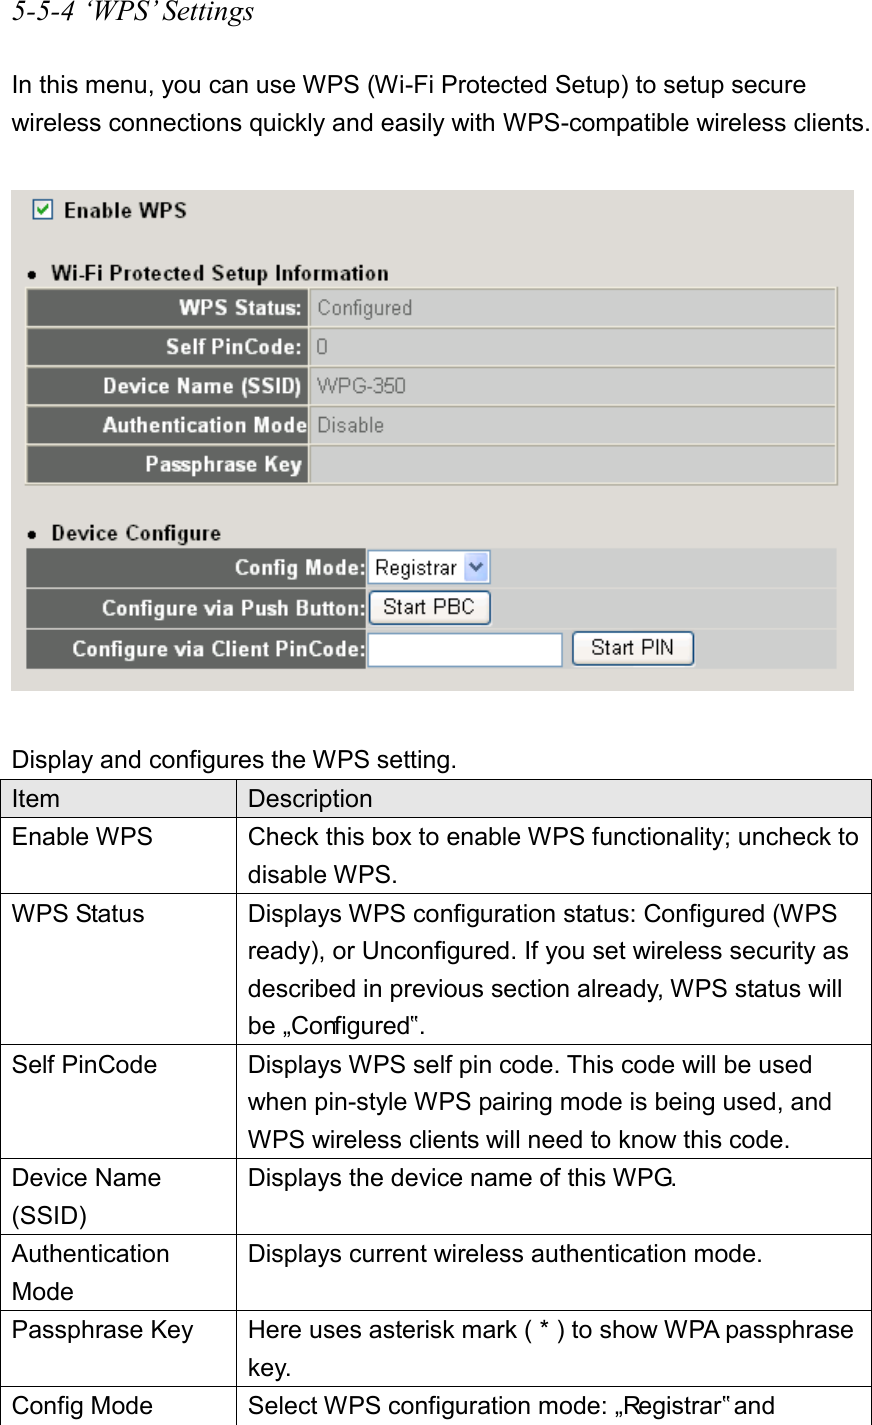 5-5-4 ‘WPS’ Settings  In this menu, you can use WPS (Wi-Fi Protected Setup) to setup secure wireless connections quickly and easily with WPS-compatible wireless clients.    Display and configures the WPS setting. Item Description Enable WPS Check this box to enable WPS functionality; uncheck to disable WPS. WPS Status Displays WPS configuration status: Configured (WPS ready), or Unconfigured. If you set wireless security as described in previous section already, WPS status will be „Configured‟. Self PinCode Displays WPS self pin code. This code will be used when pin-style WPS pairing mode is being used, and WPS wireless clients will need to know this code. Device Name (SSID) Displays the device name of this WPG. Authentication Mode Displays current wireless authentication mode. Passphrase Key Here uses asterisk mark ( * ) to show WPA passphrase key. Config Mode Select WPS configuration mode: „Registrar‟ and 